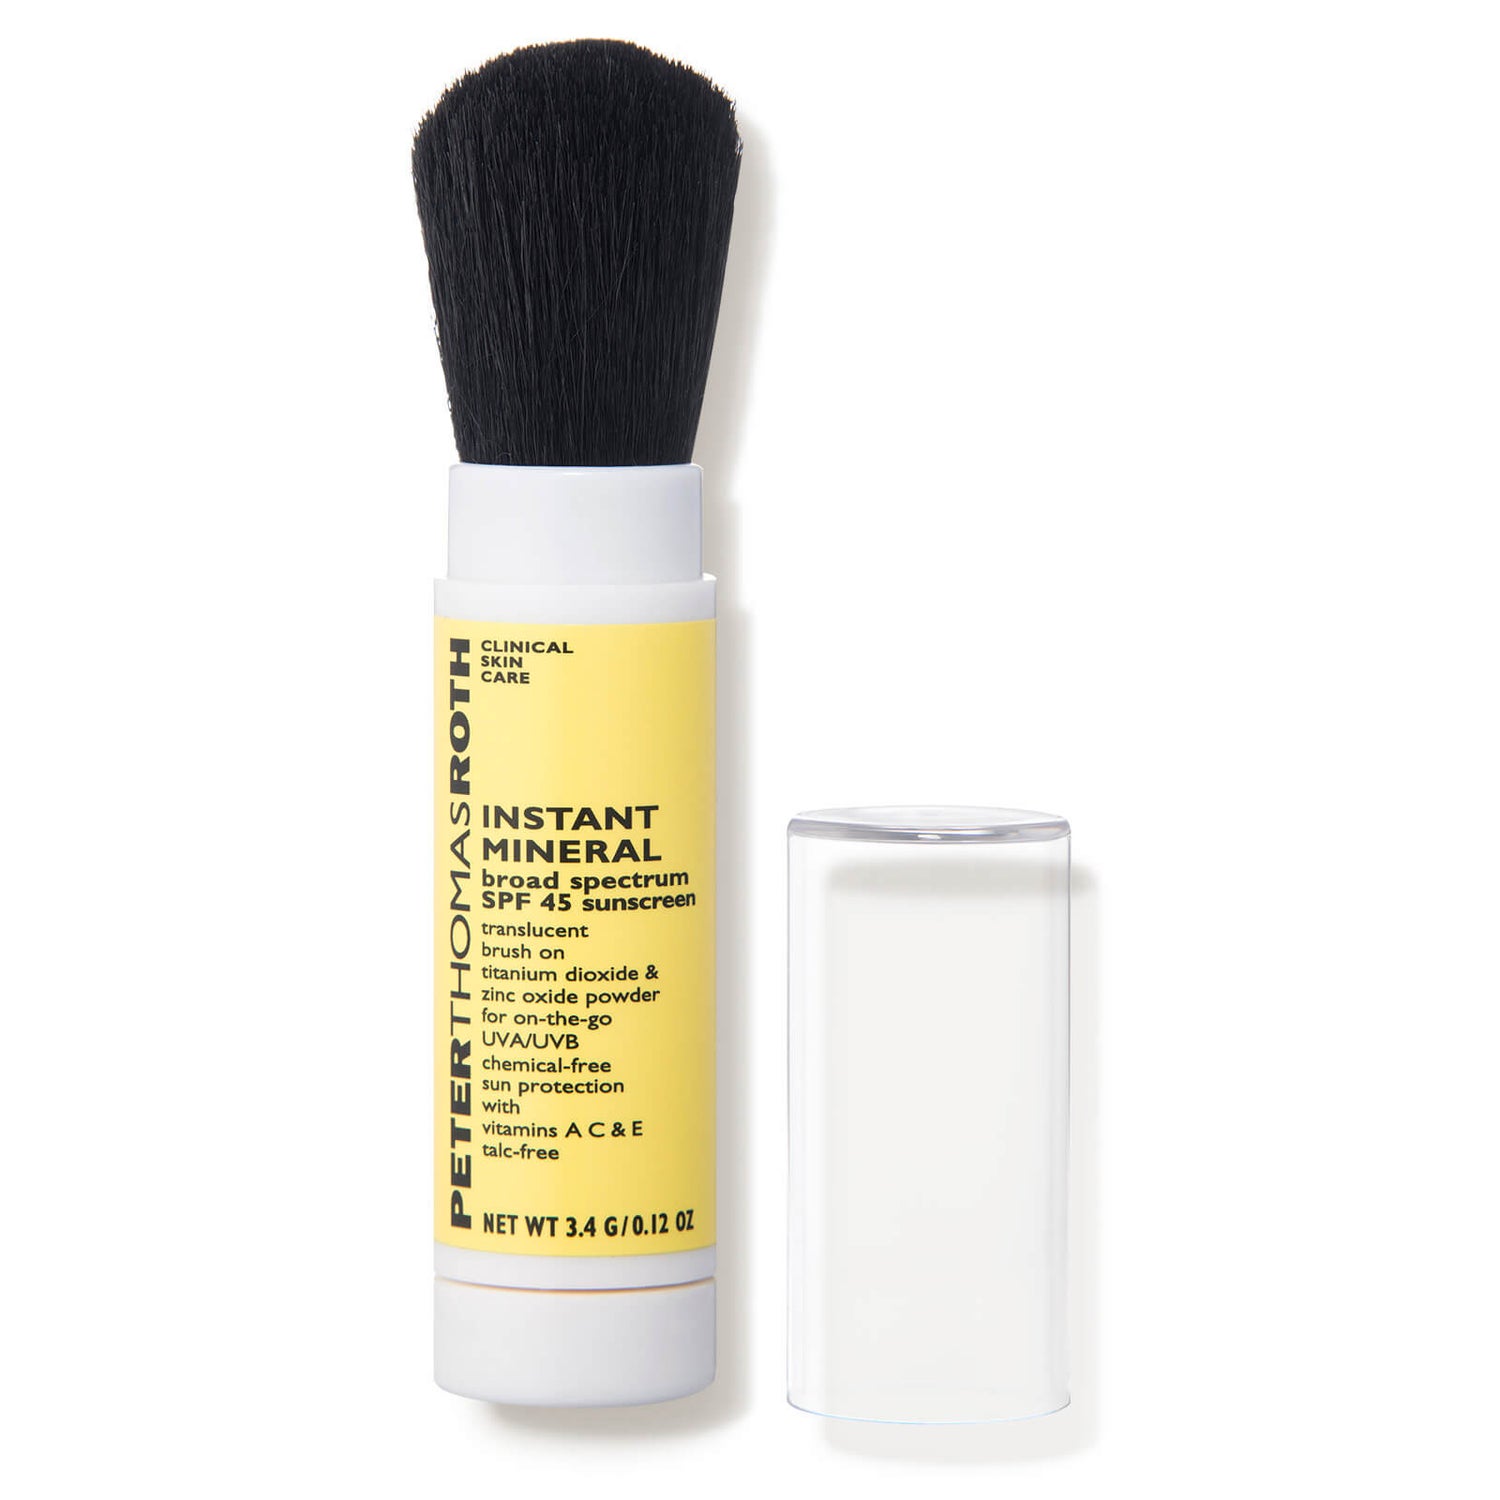 Peter Thomas Roth Instant Mineral SPF 45 (0.12 oz.)